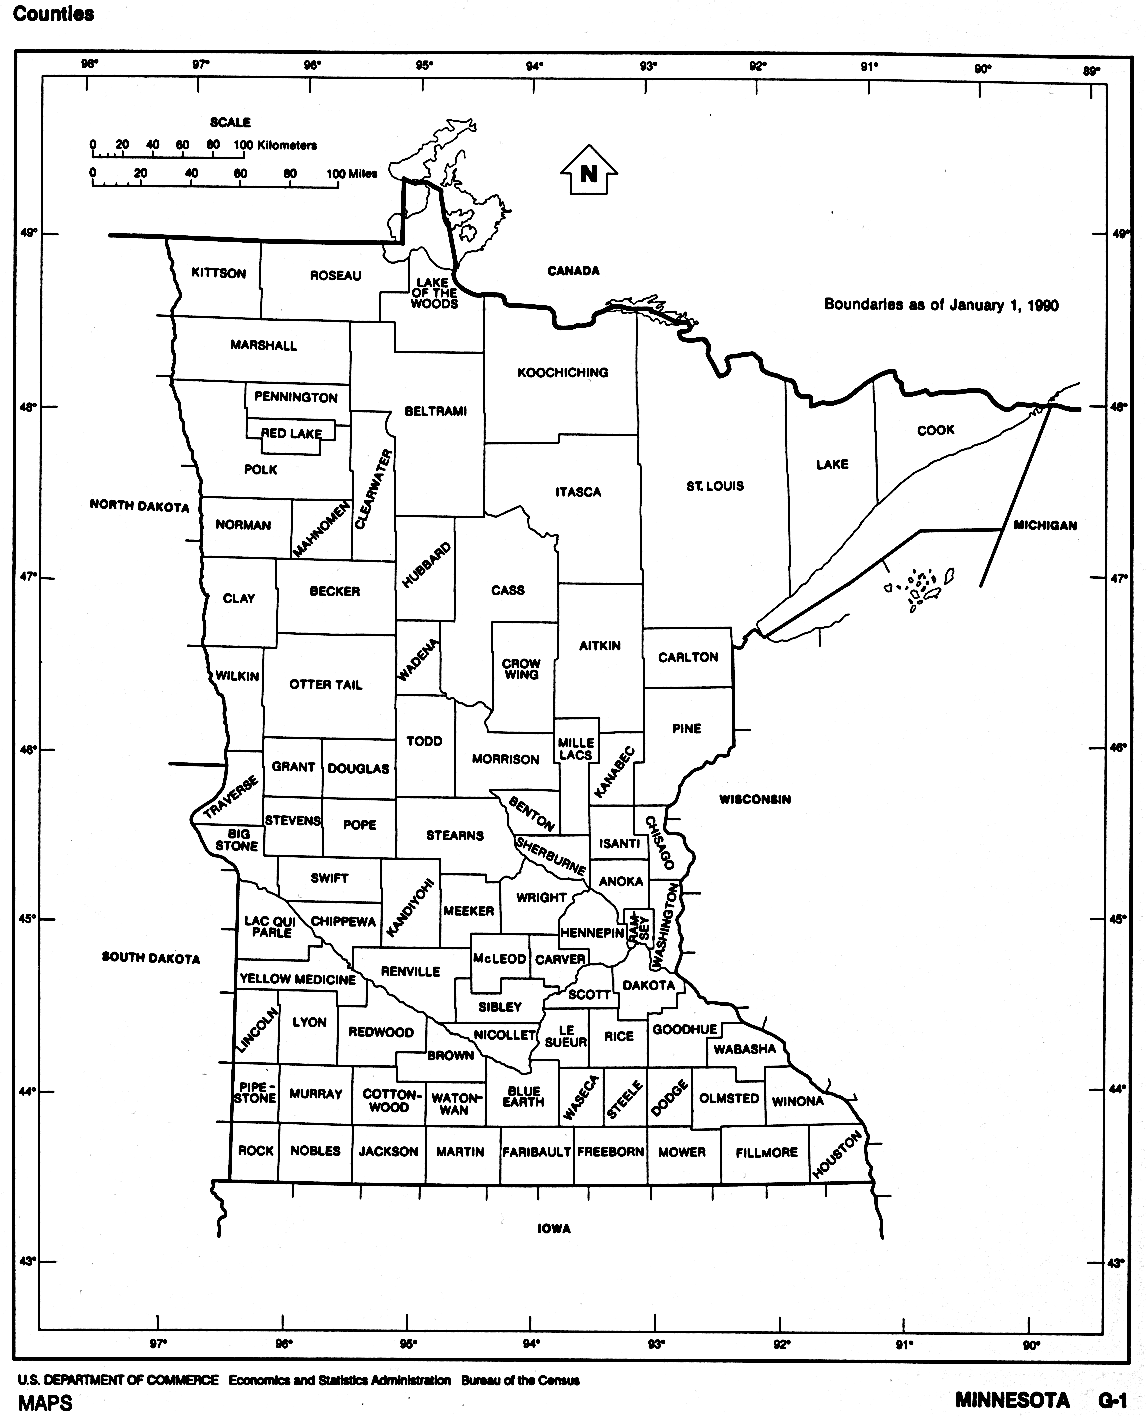 Minnesota Counties map with location outline of each county in MN